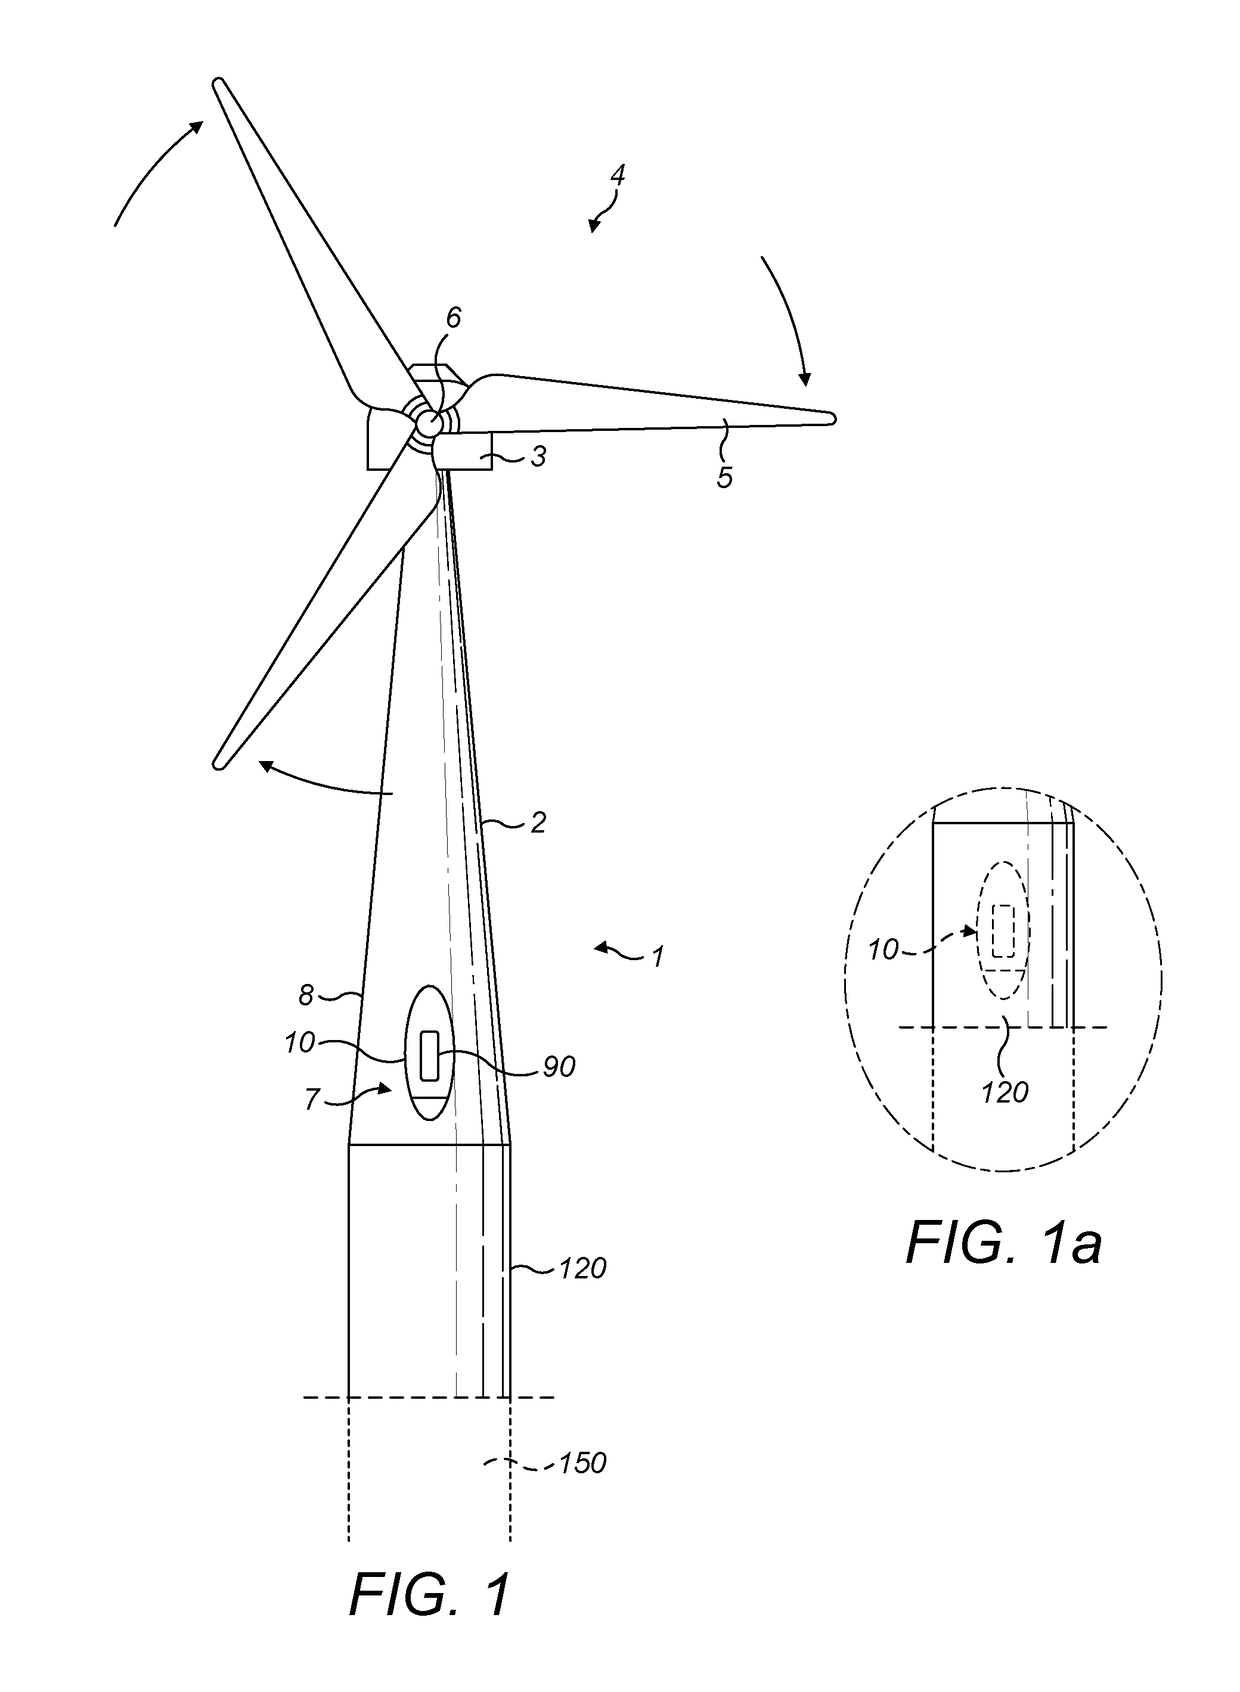 Access panel for a wind turbine tower and method for securing same